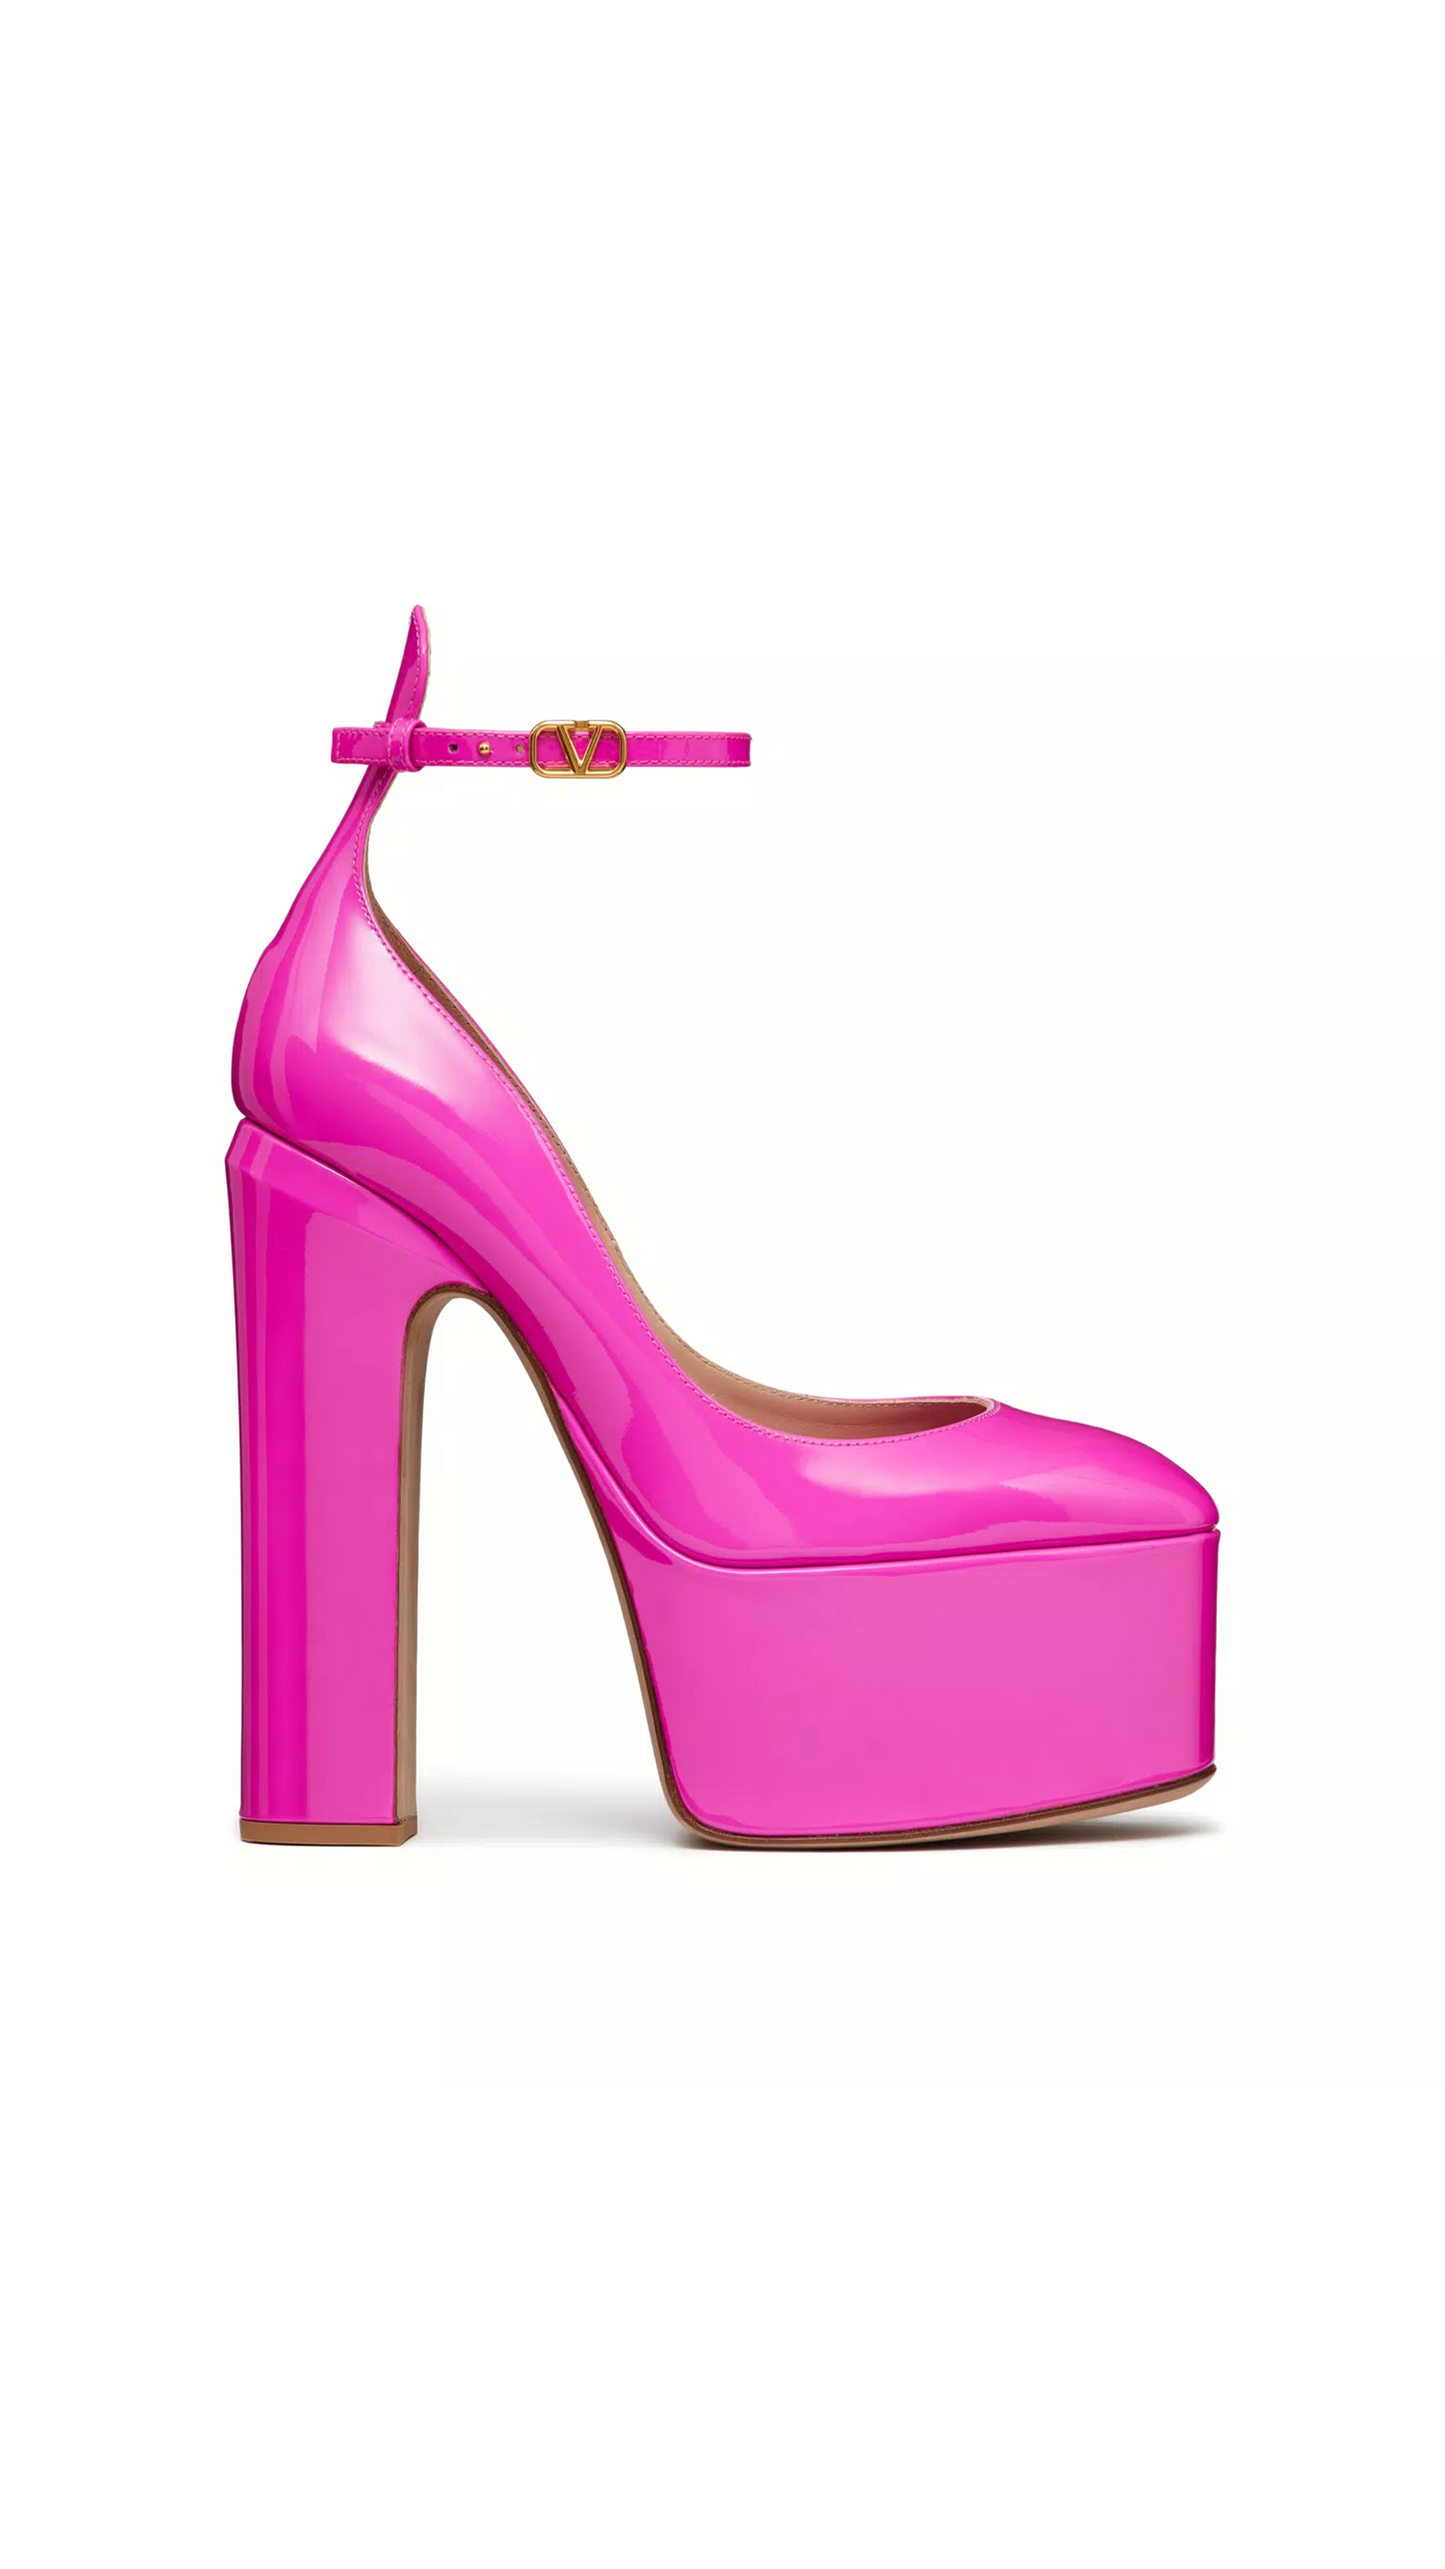 Tan-go Platform Pump in Patent Leather 155mm - Pink PP